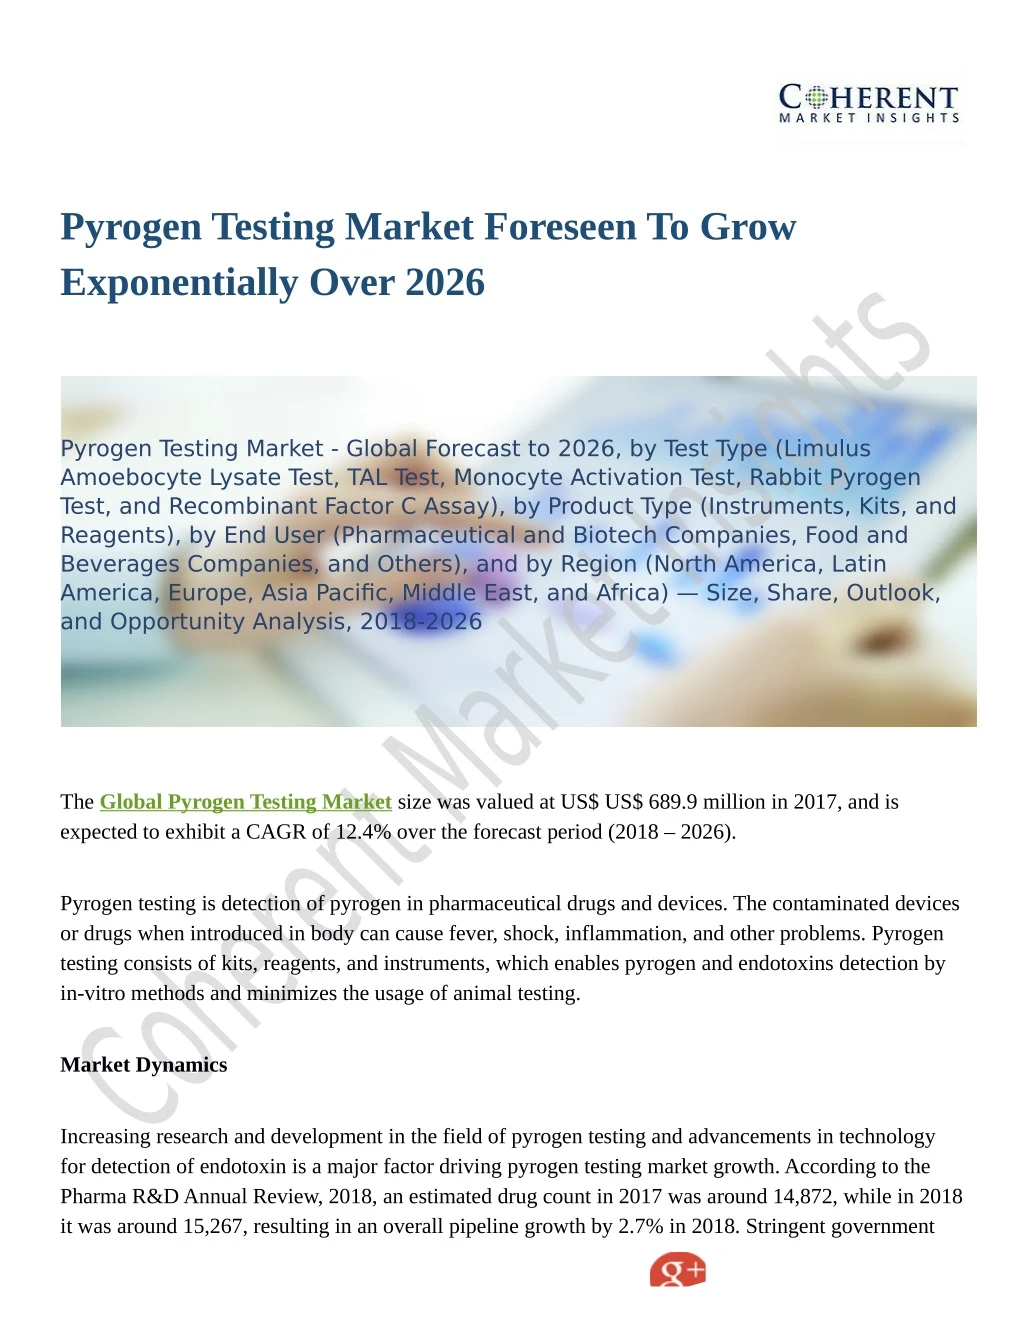 pyrogen testing market foreseen to grow